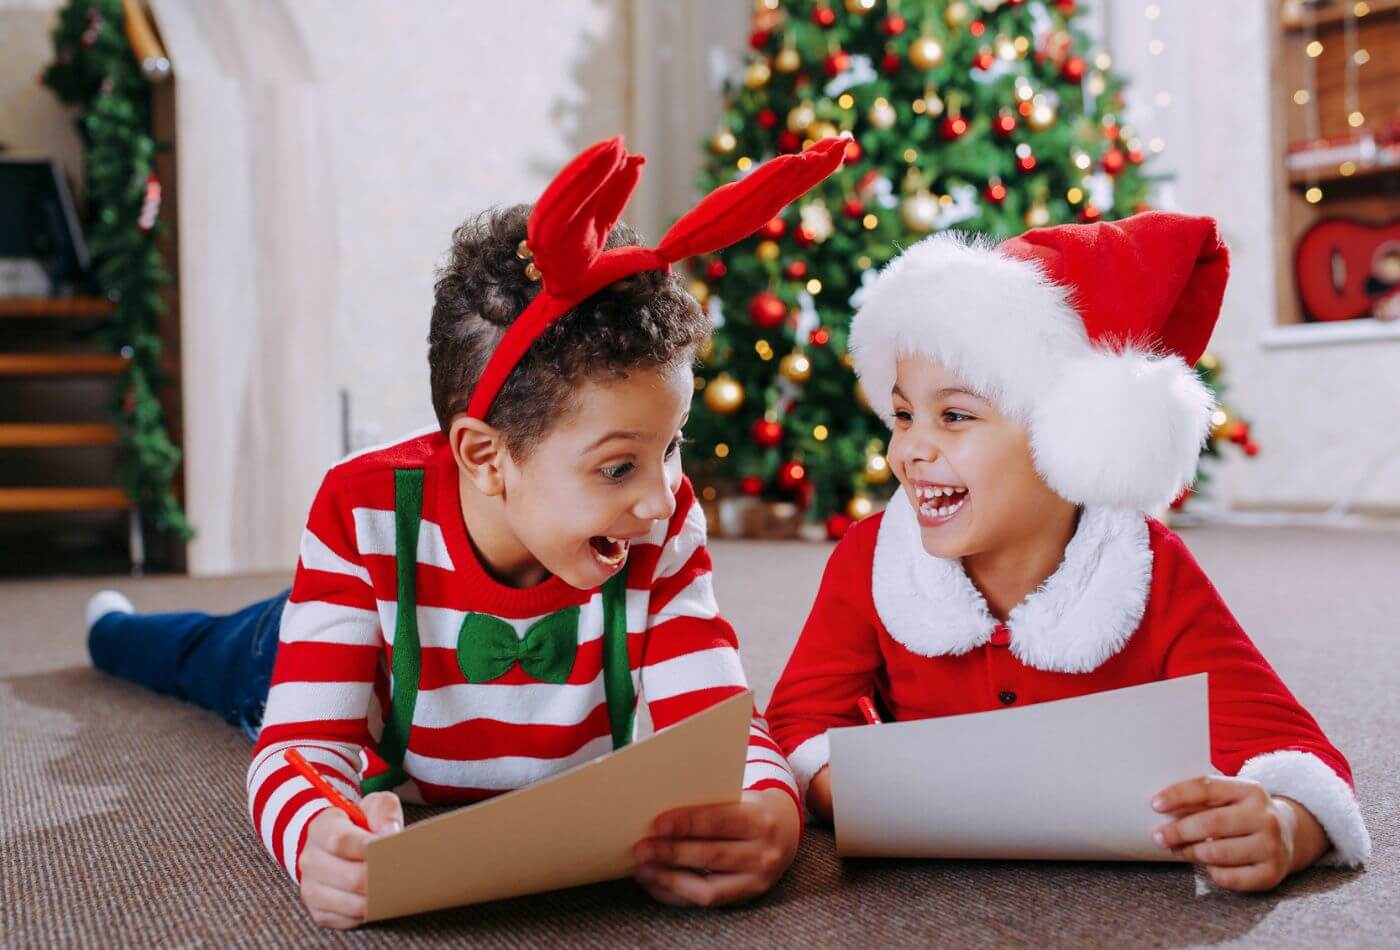 Two children in festive outfits writing Christmas lists.